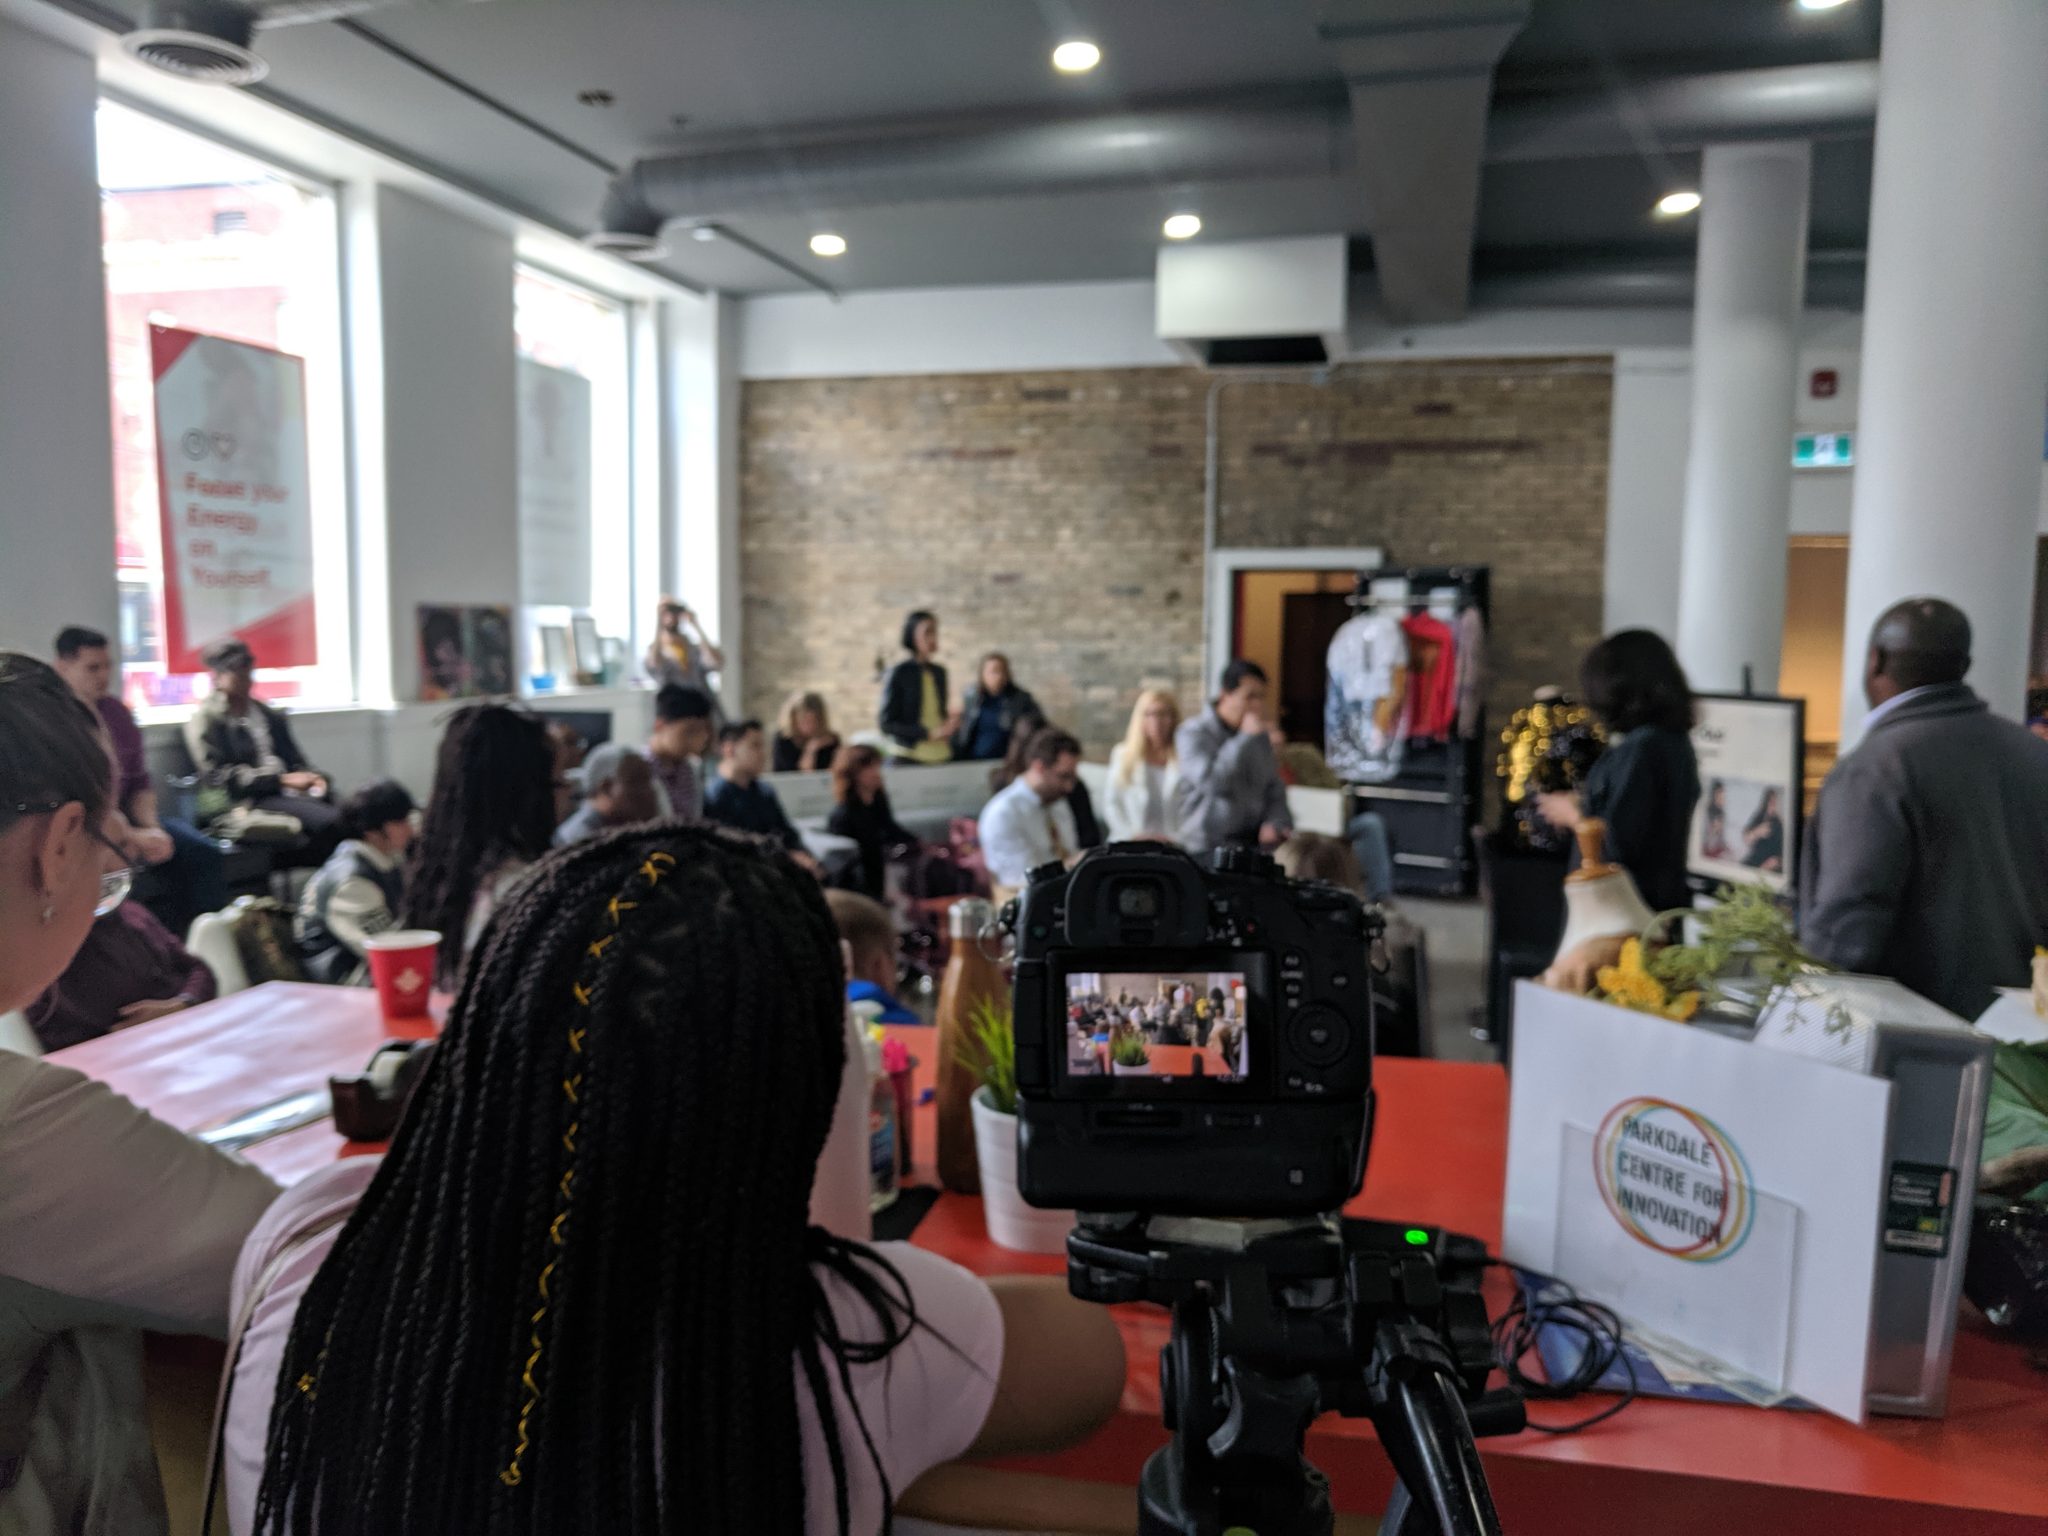 PARKDALE CENTRE FOR INNOVATION- IS ONE OF THE FIRST INCUBATORS IN TORONTO TO SUPPORT STARTUPS AT THE EARLY-STAGE OF THEIR VENTURES THROUGH THE EARLYSTAGE FOR ENTREPRENEURSHIP